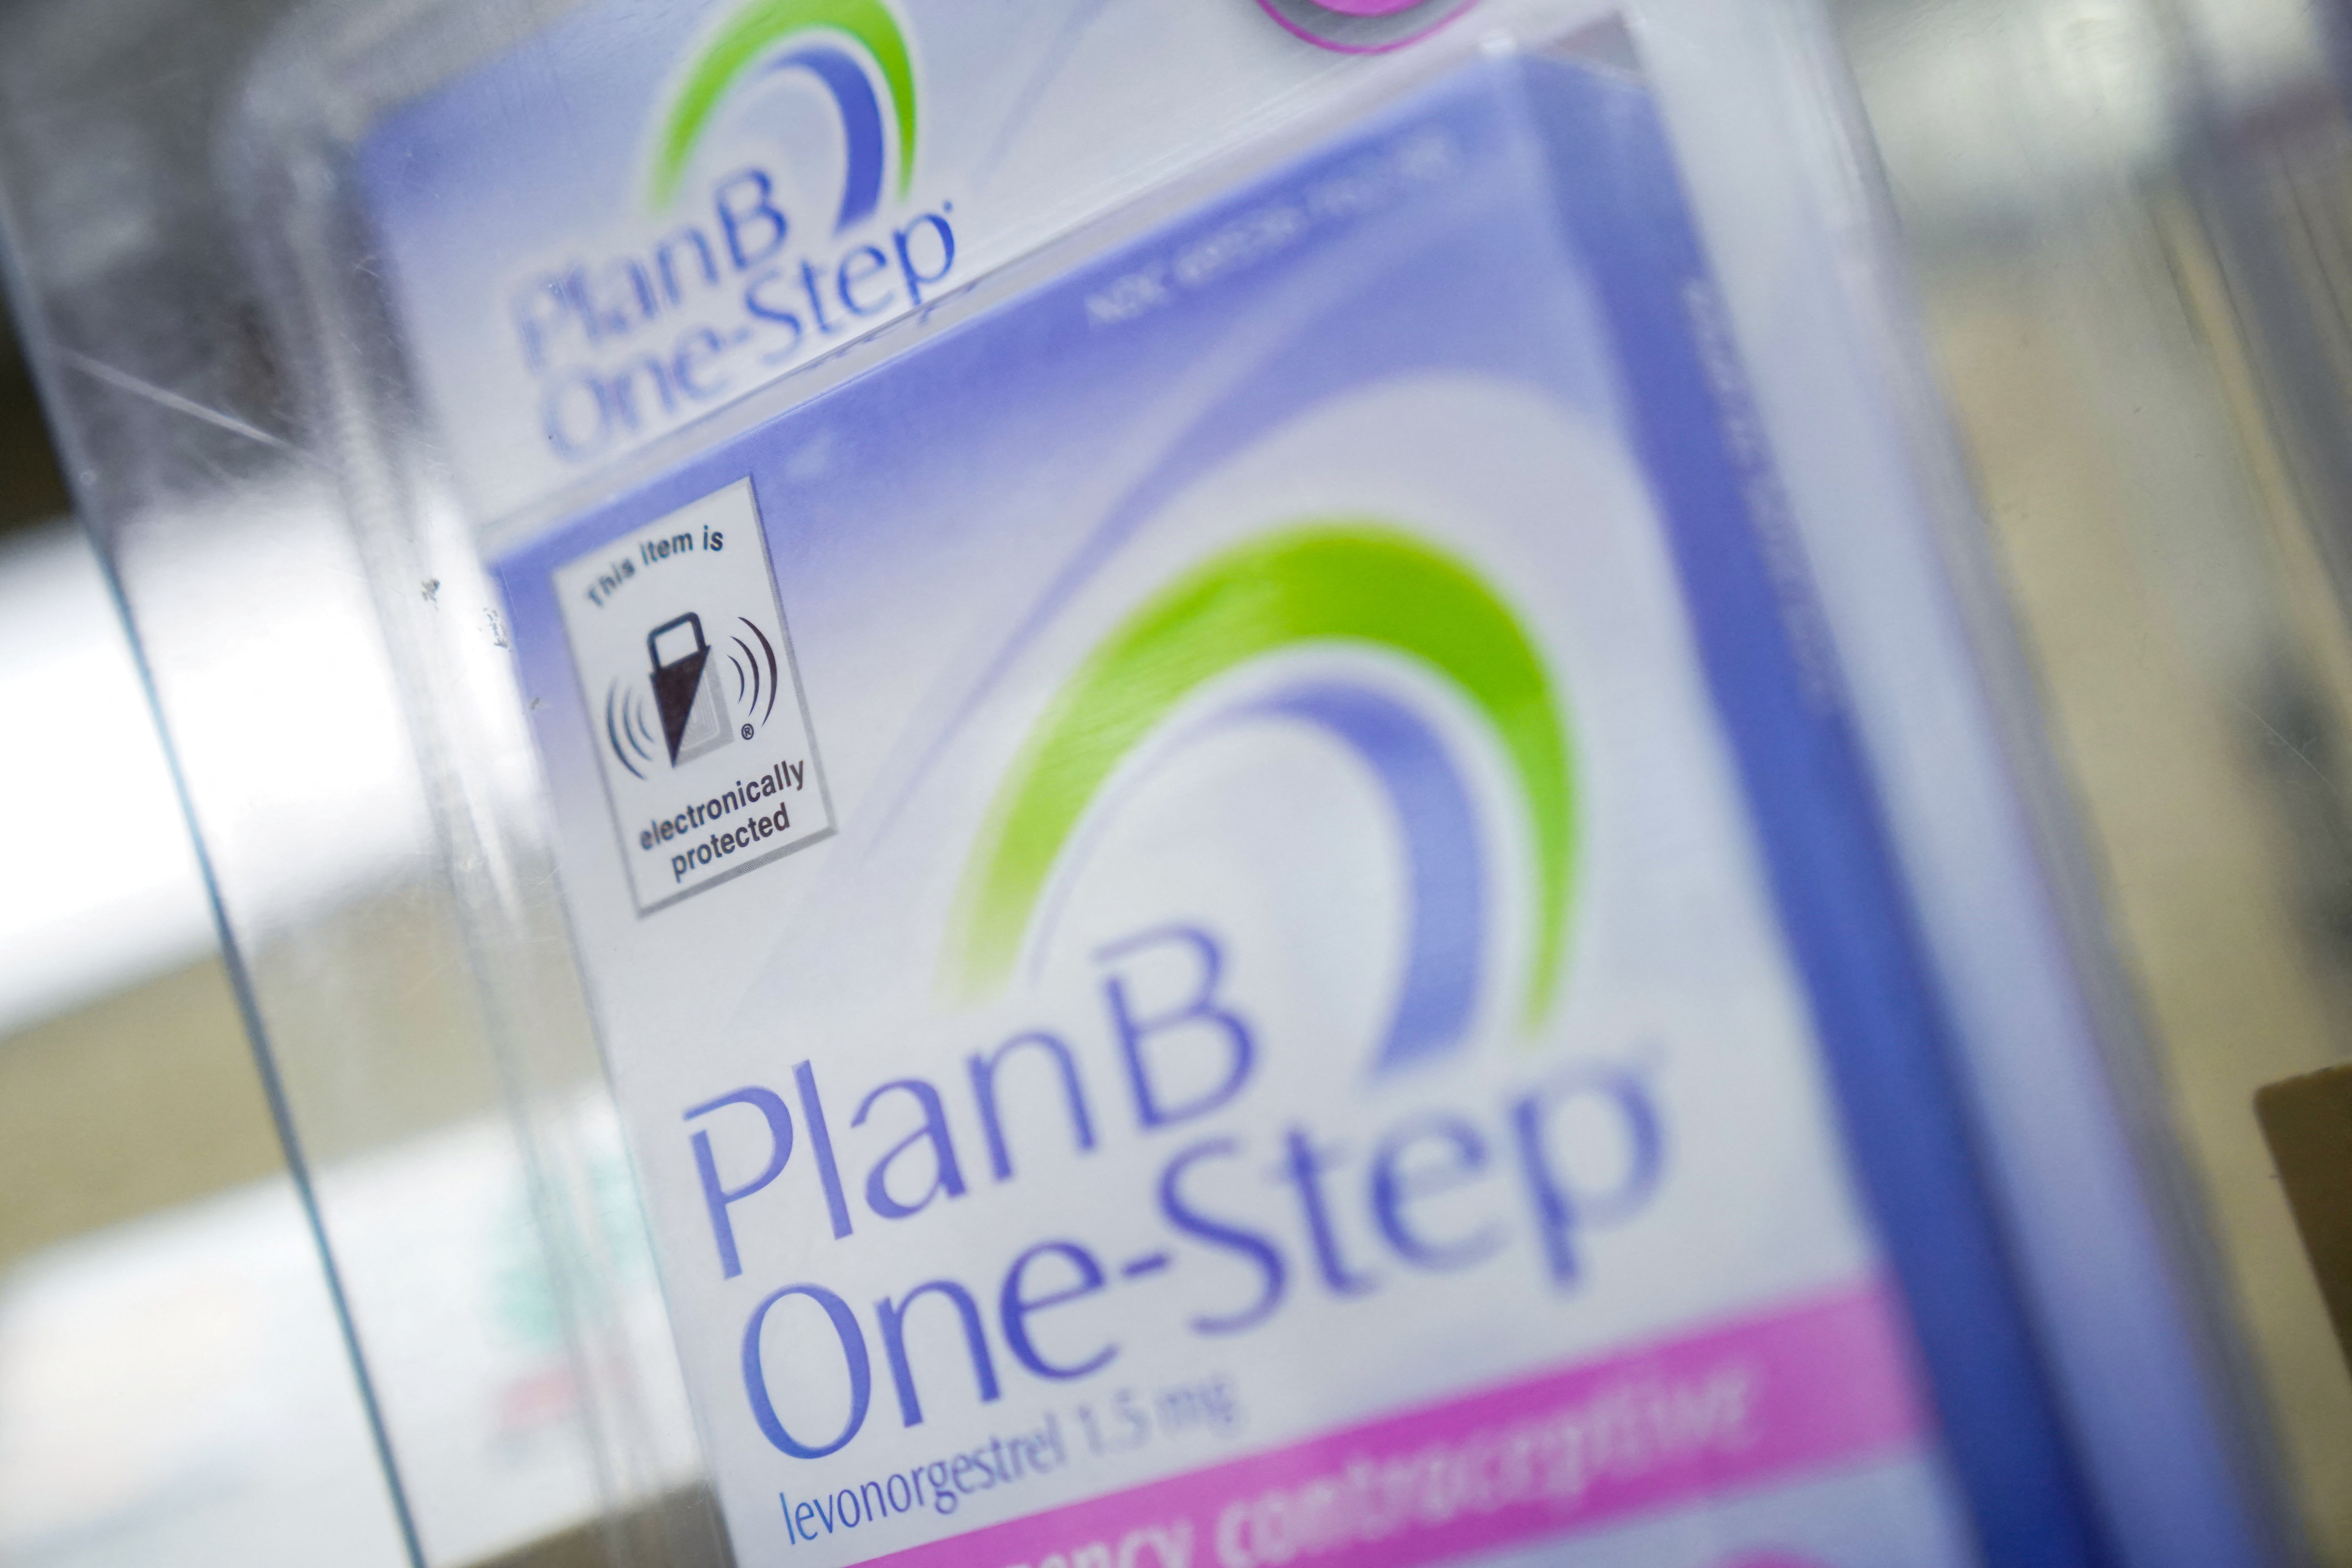 Owners of morning-after pill Plan B mulling $4 billion sale of